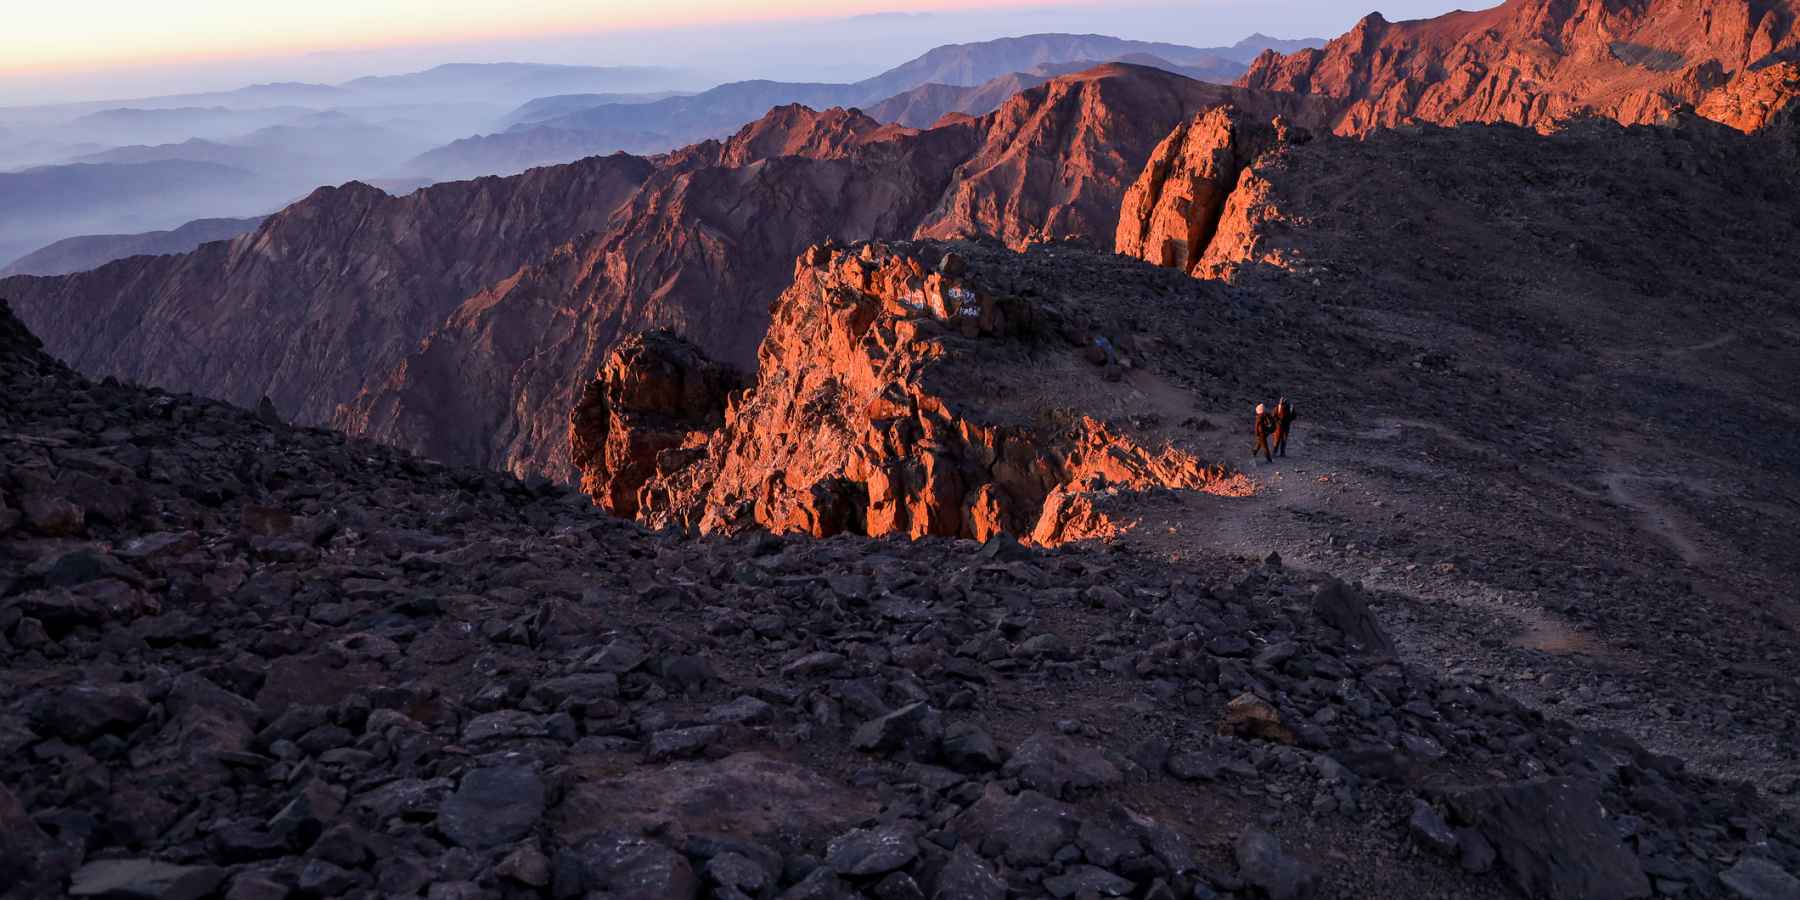 Two hikers watch the sun rise in the rocky High Atlas Mountains of Morocco.